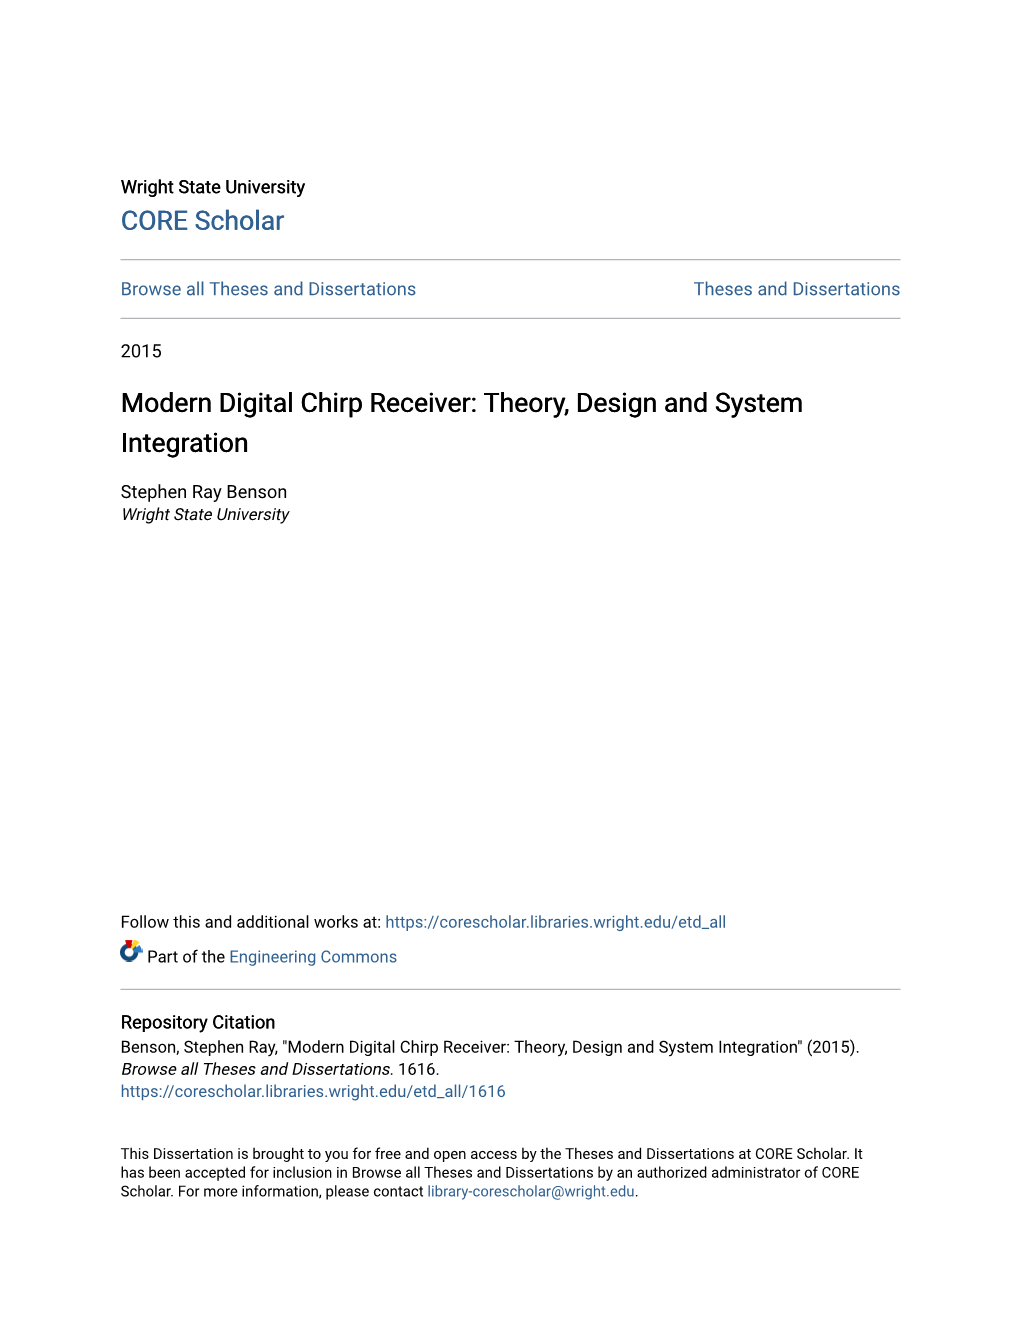 Modern Digital Chirp Receiver: Theory, Design and System Integration